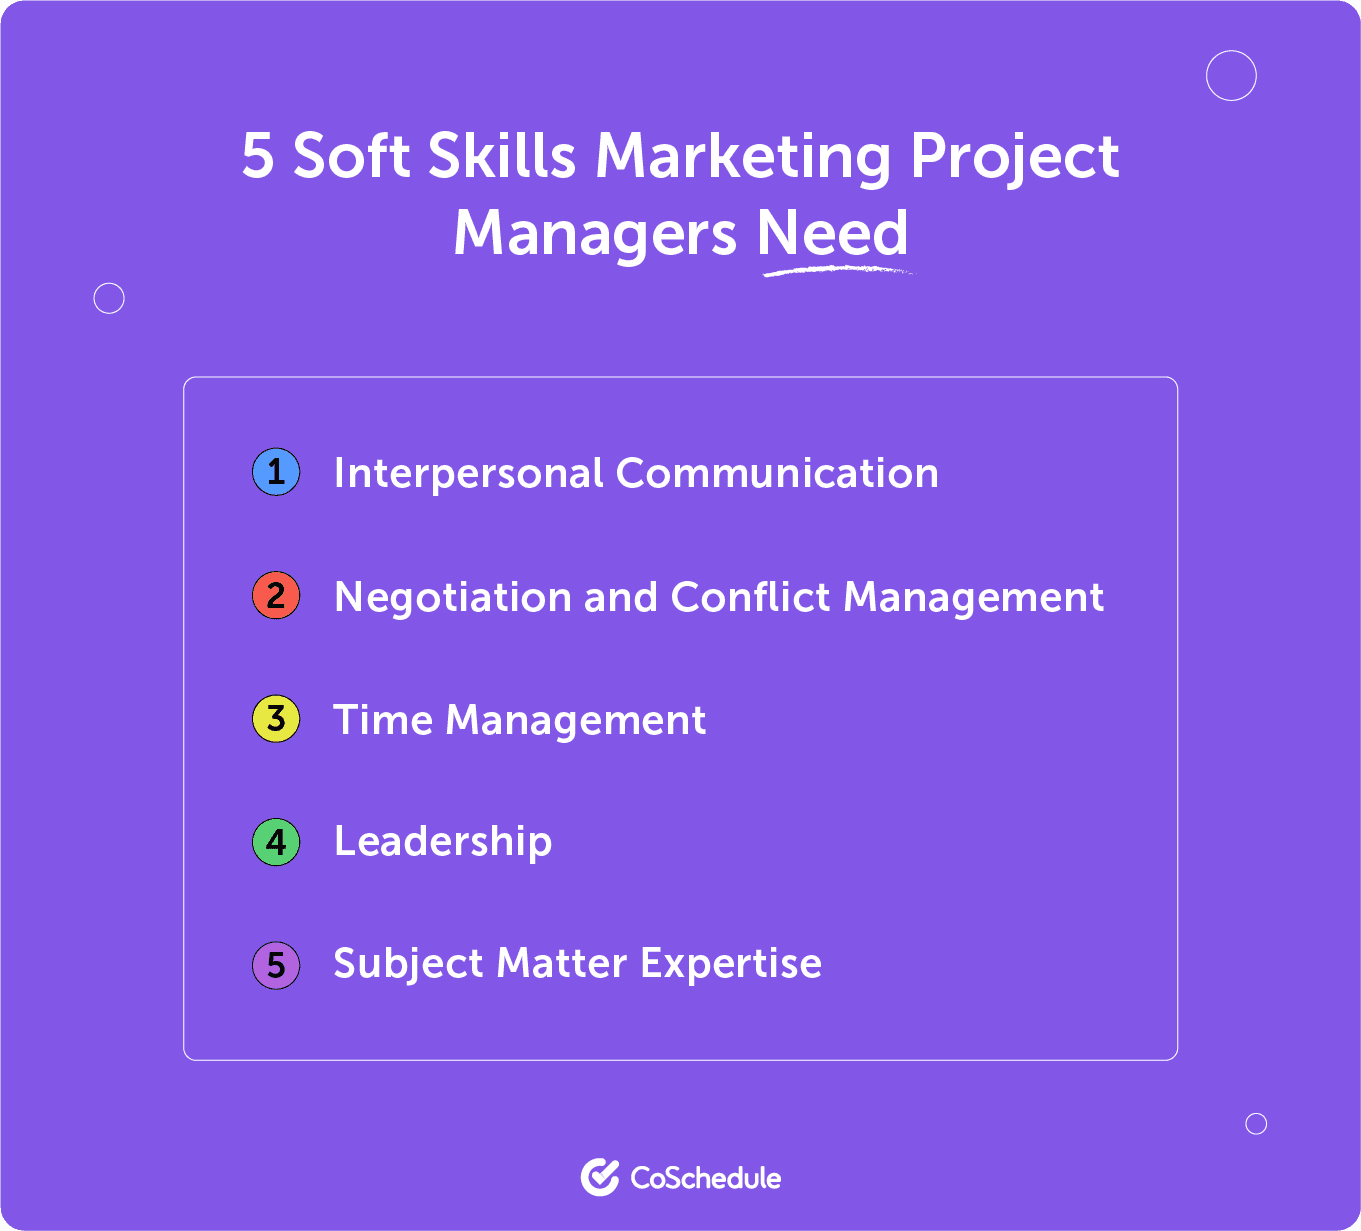 The skills marketing project managers need